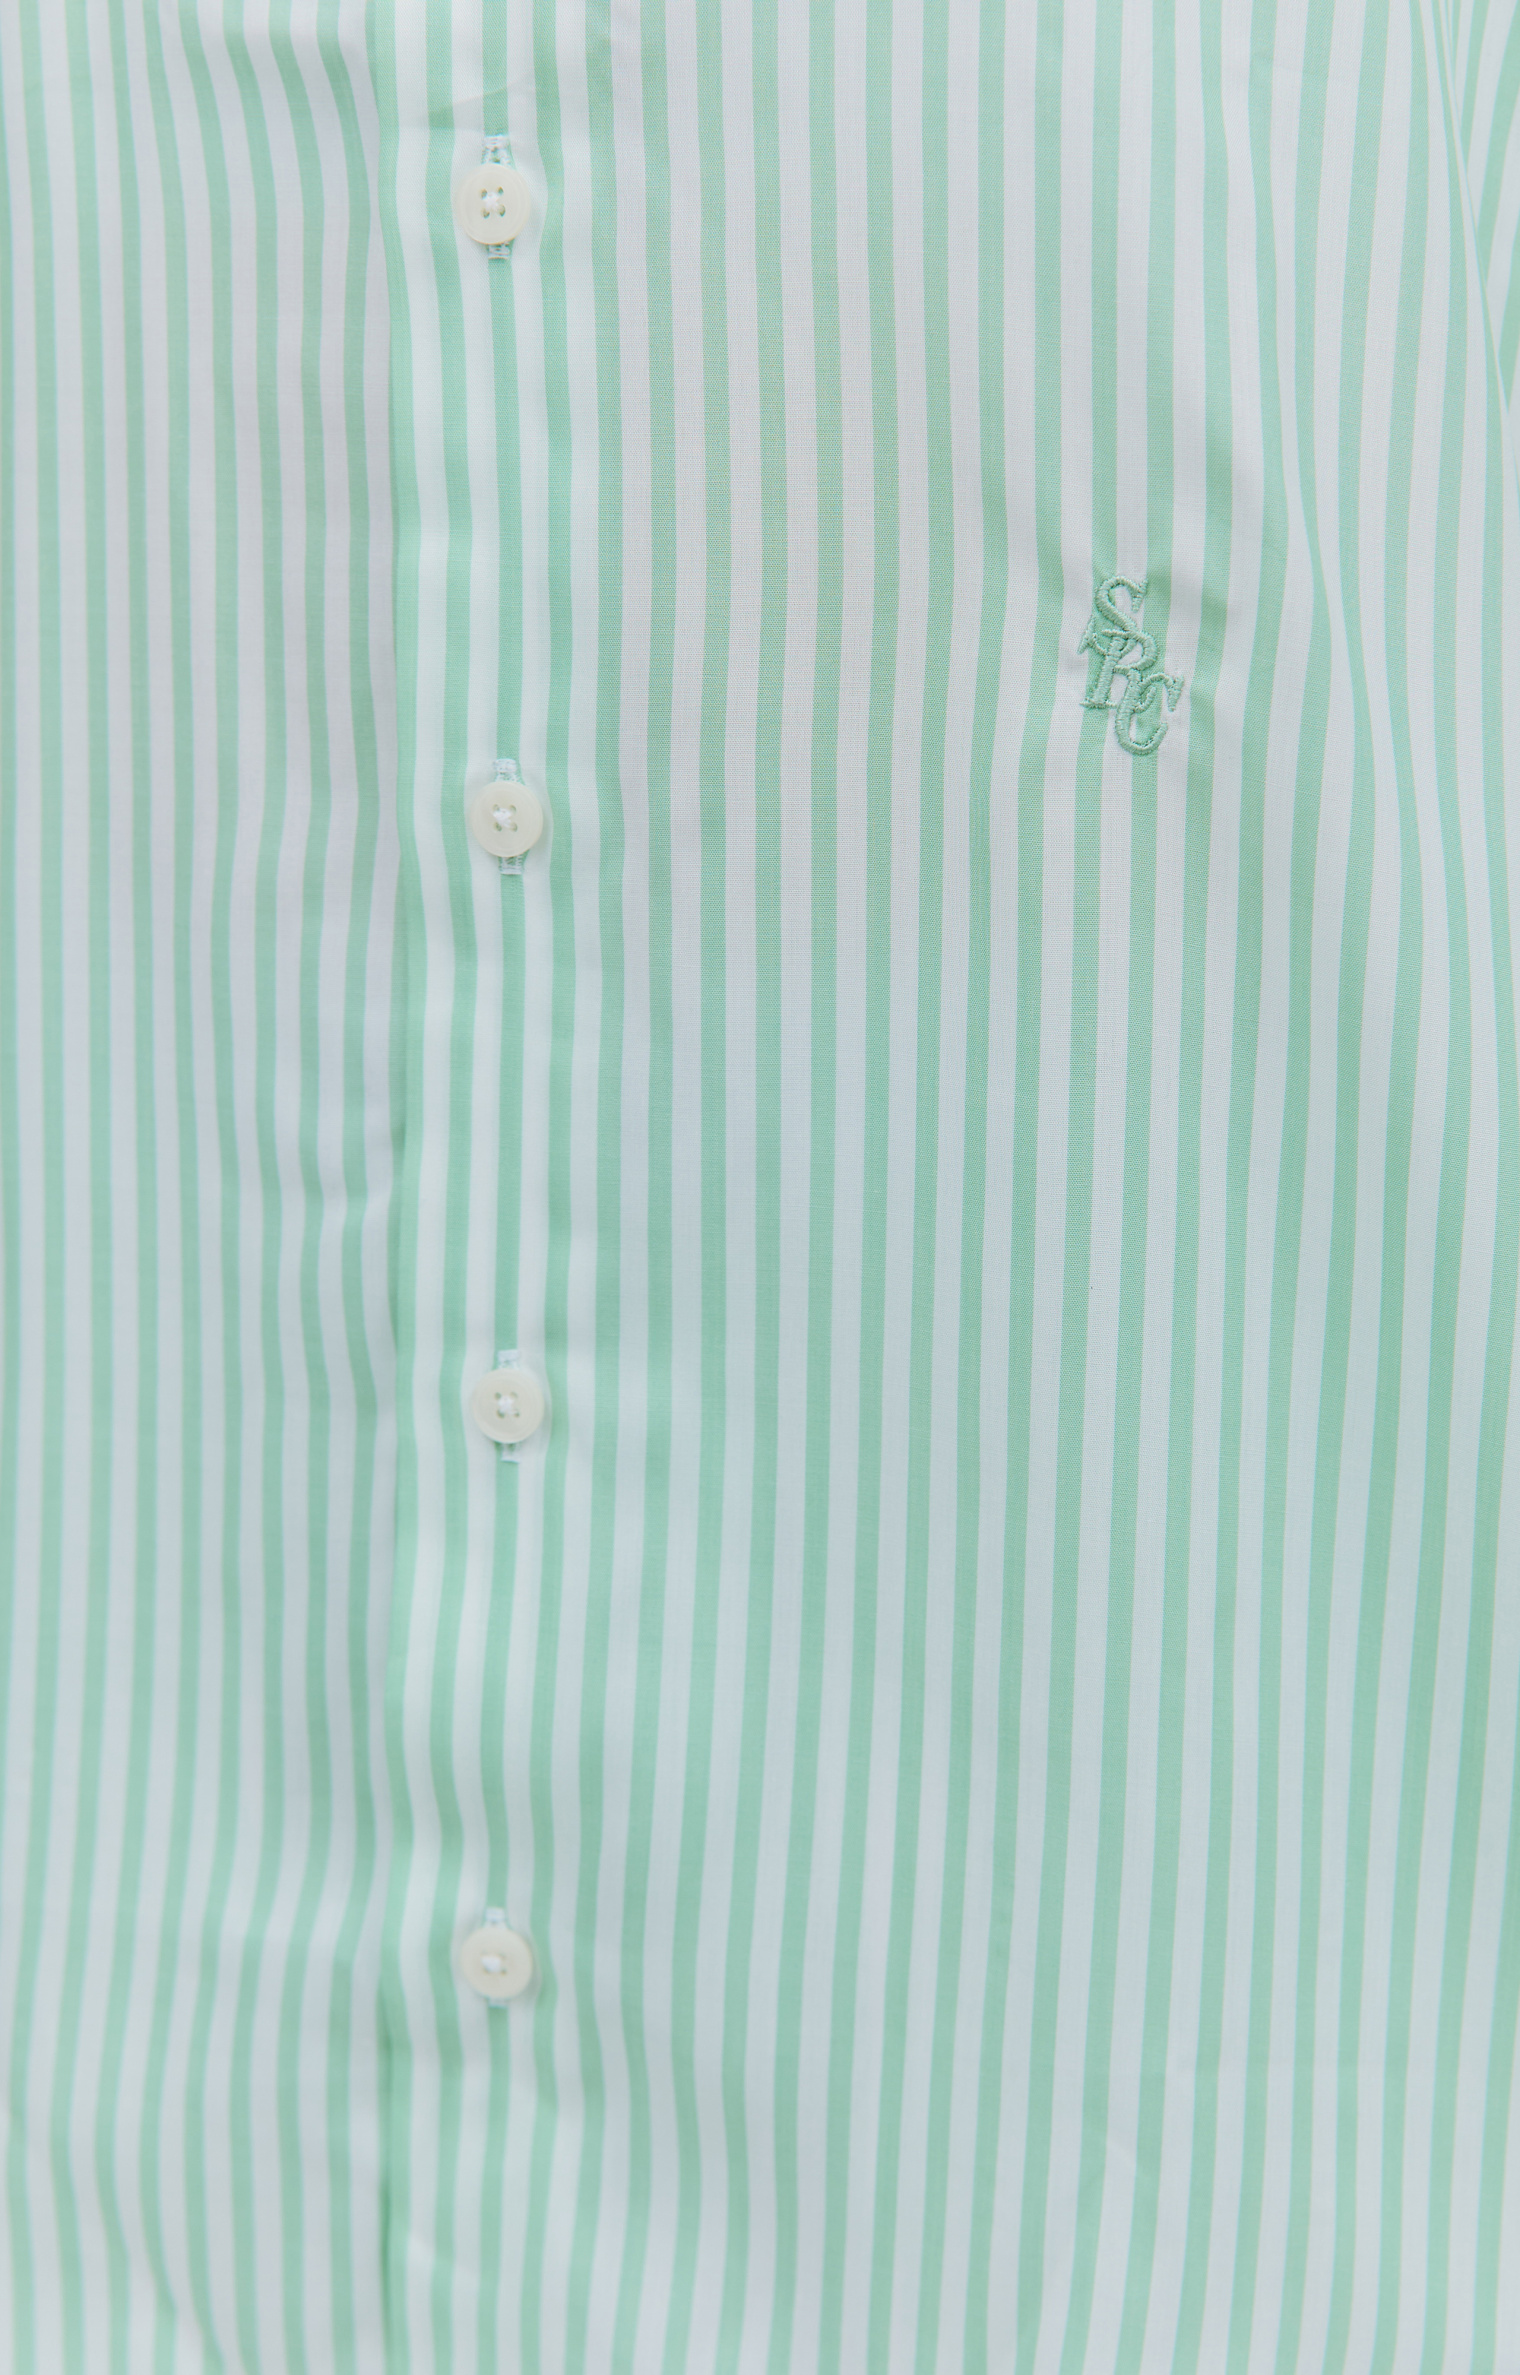 SPORTY & RICH Striped shirt with logo